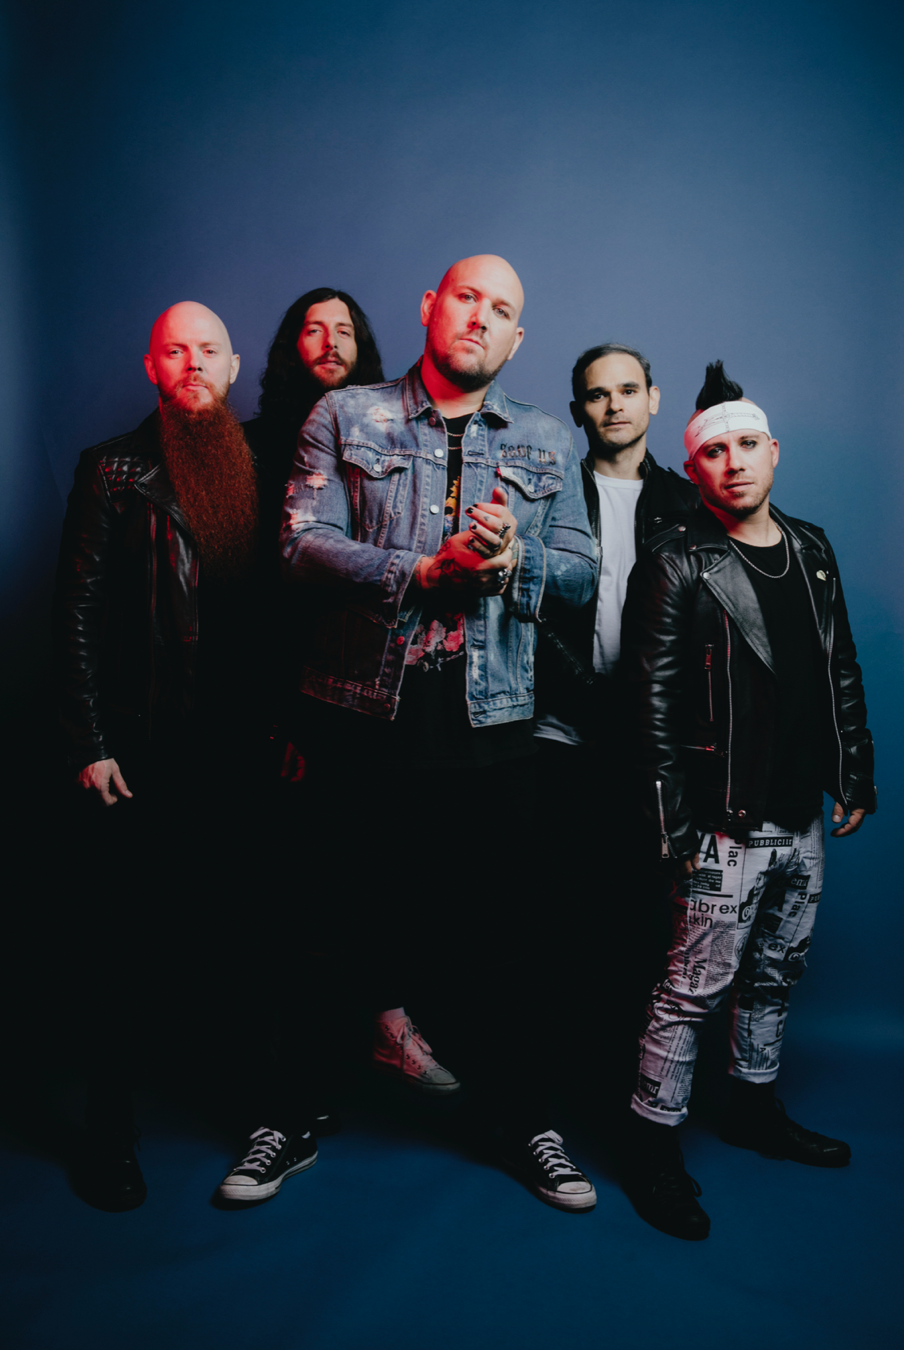 Atreyu Share Video for New Song "Save Us"